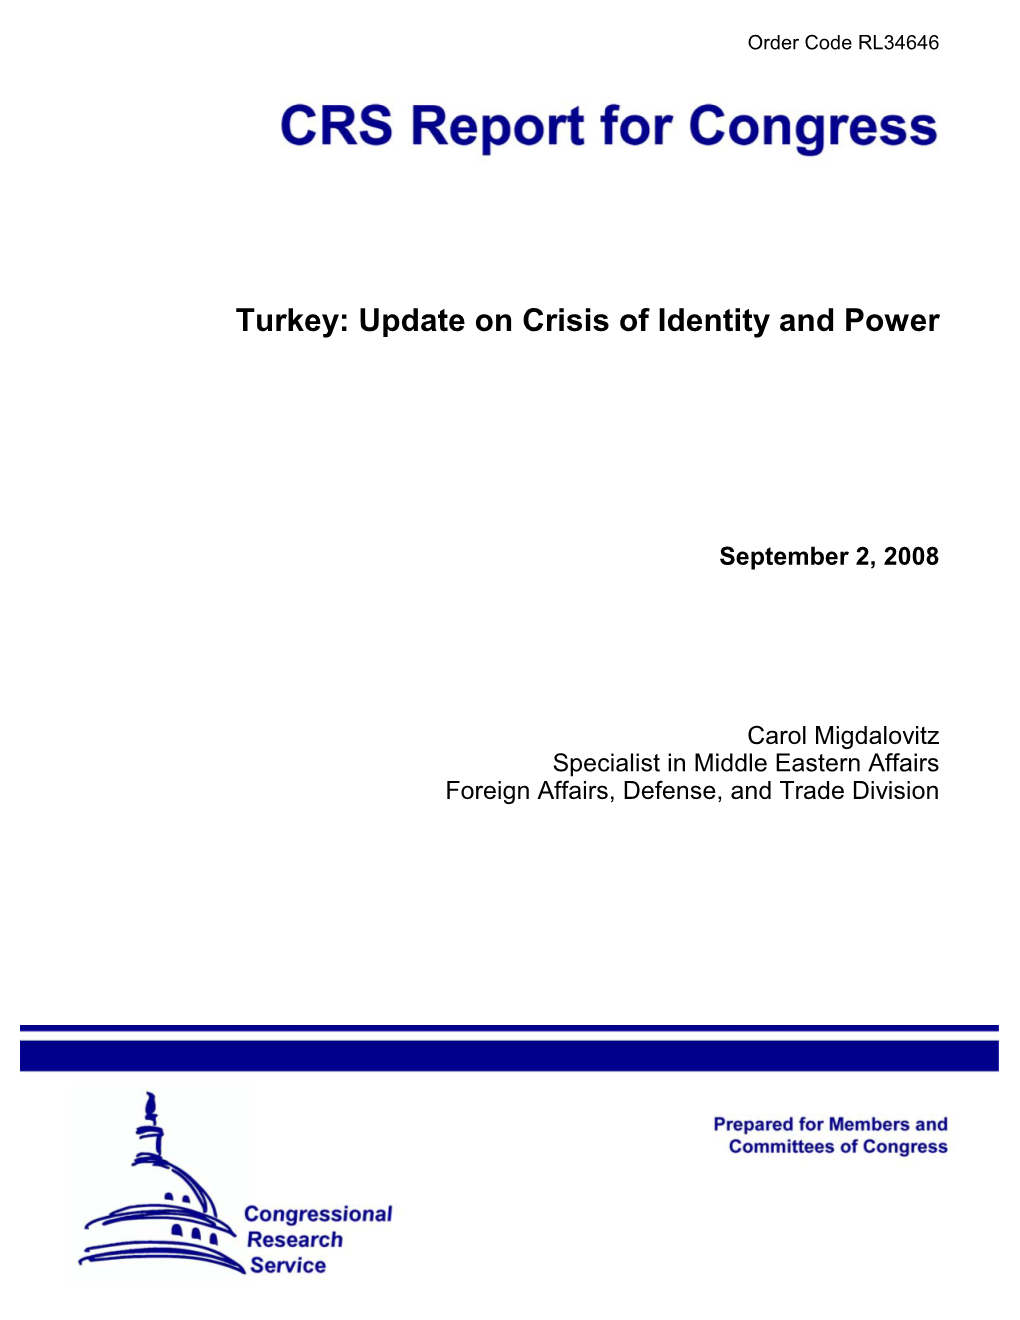 Turkey: Update on Crisis of Identity and Power